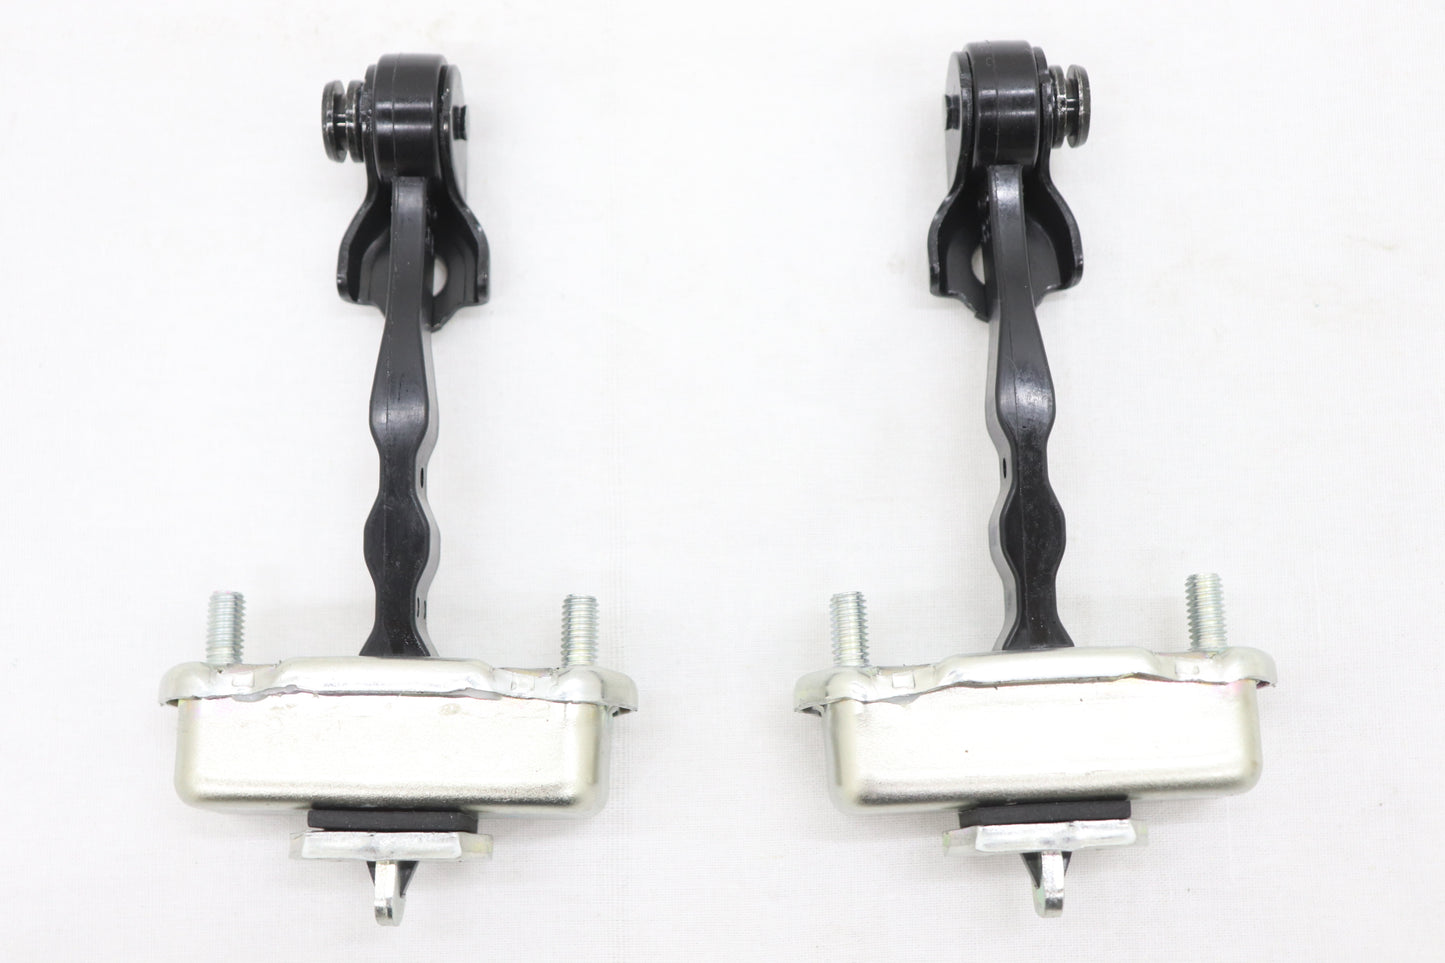 NISSAN R35 Door Link and Cover Set - Can be used for BNR34 S15